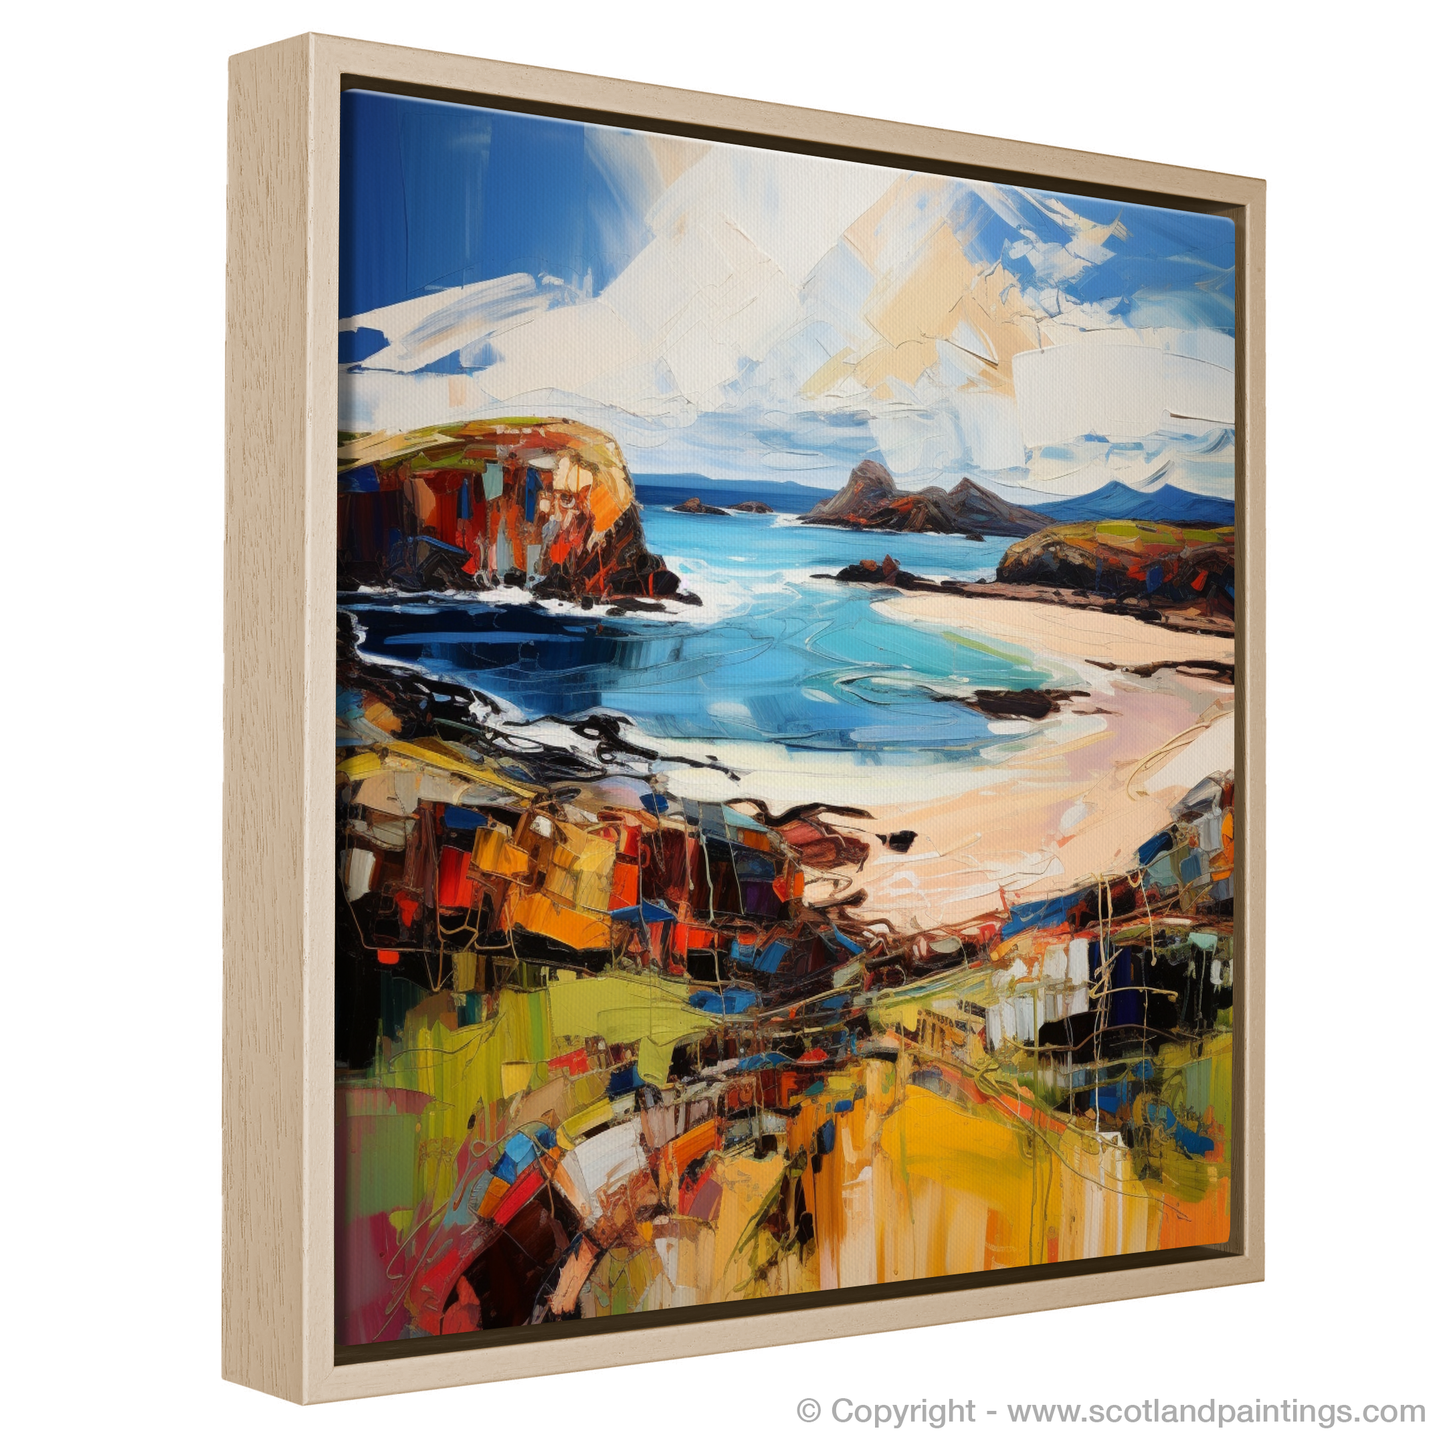 Painting and Art Print of Scourie Bay, Sutherland entitled "Embracing the Wild: Scourie Bay Expressionist Ode".